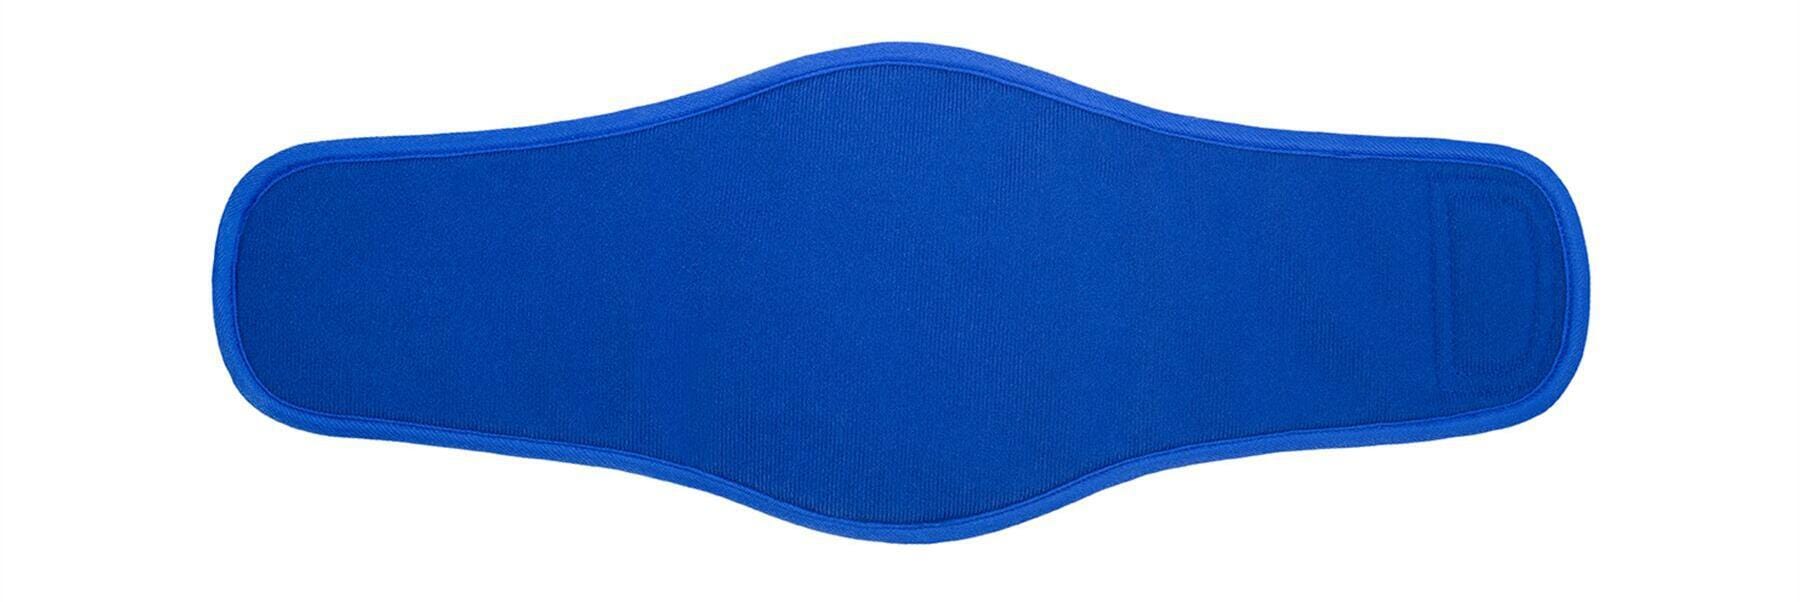 KUTKUT Dog Diapers Male, Washable & Reusable Belly Bands for Male Dogs Wraps, Highly Absorbent Upgrade Durable Belly Diapers for Dogs (Blue) - kutkutstyle